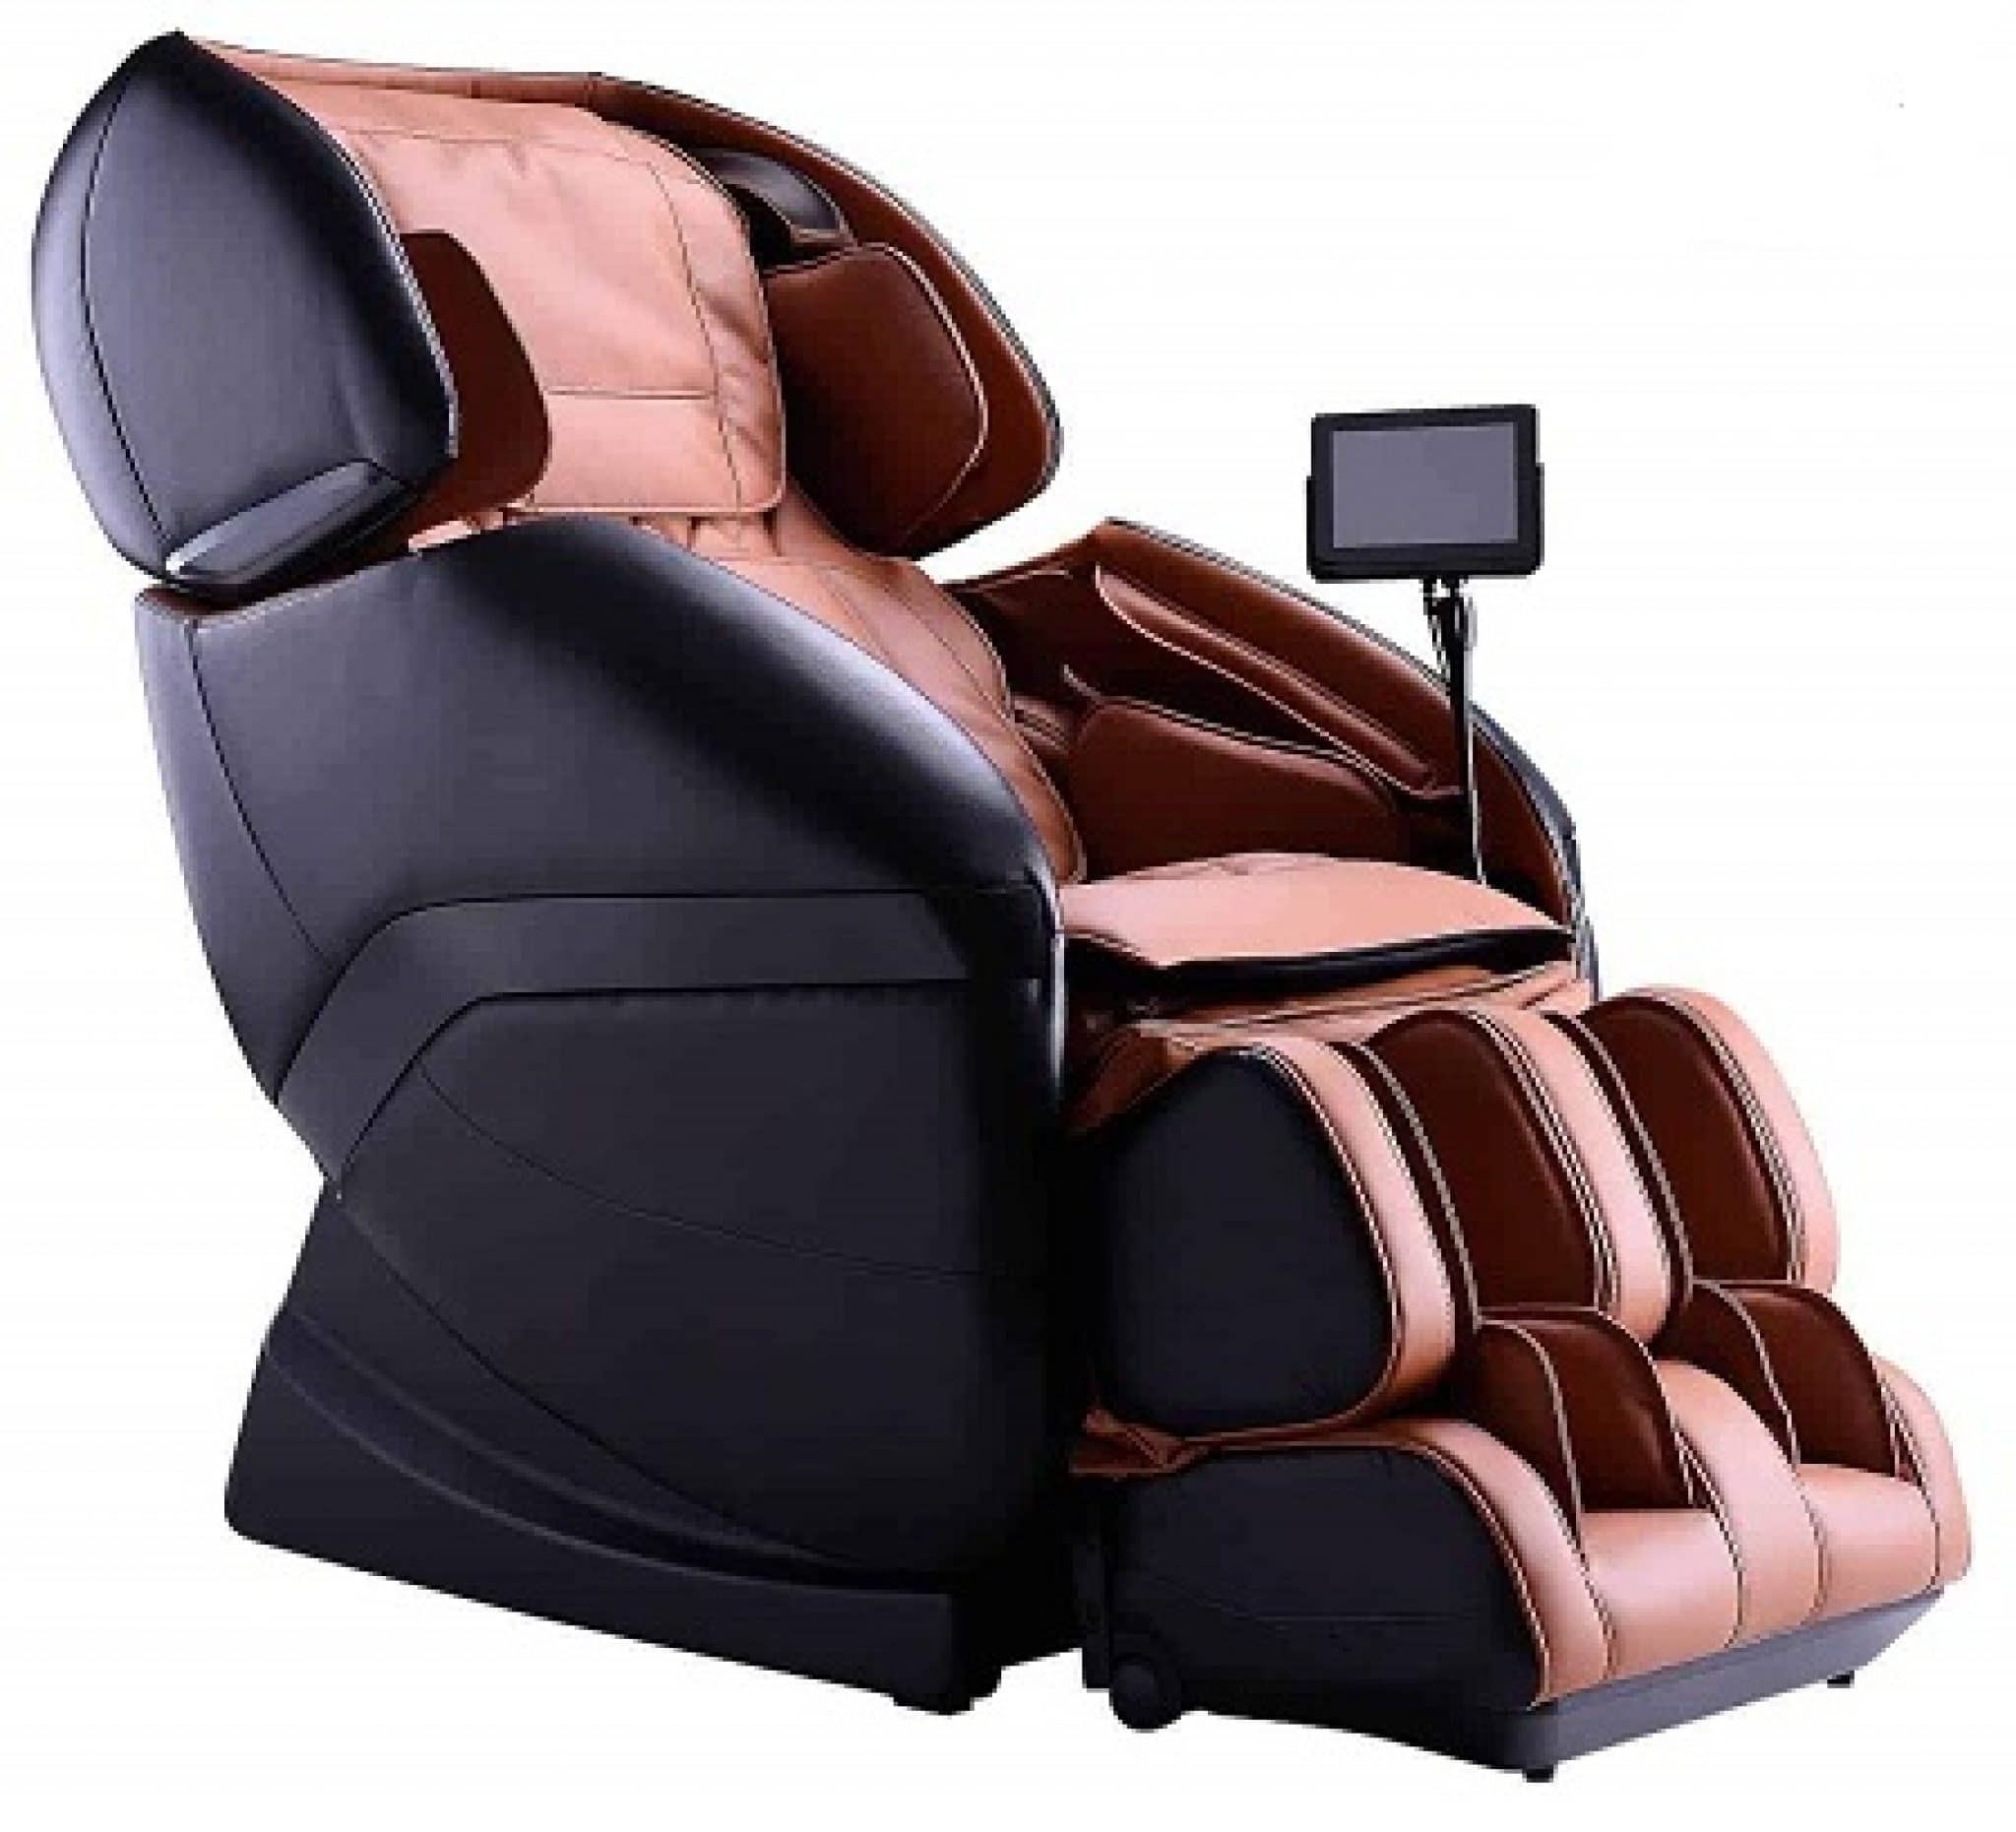 How Much Does a Massage Chair Cost, is it Worth to Have? - Best Brands HQ